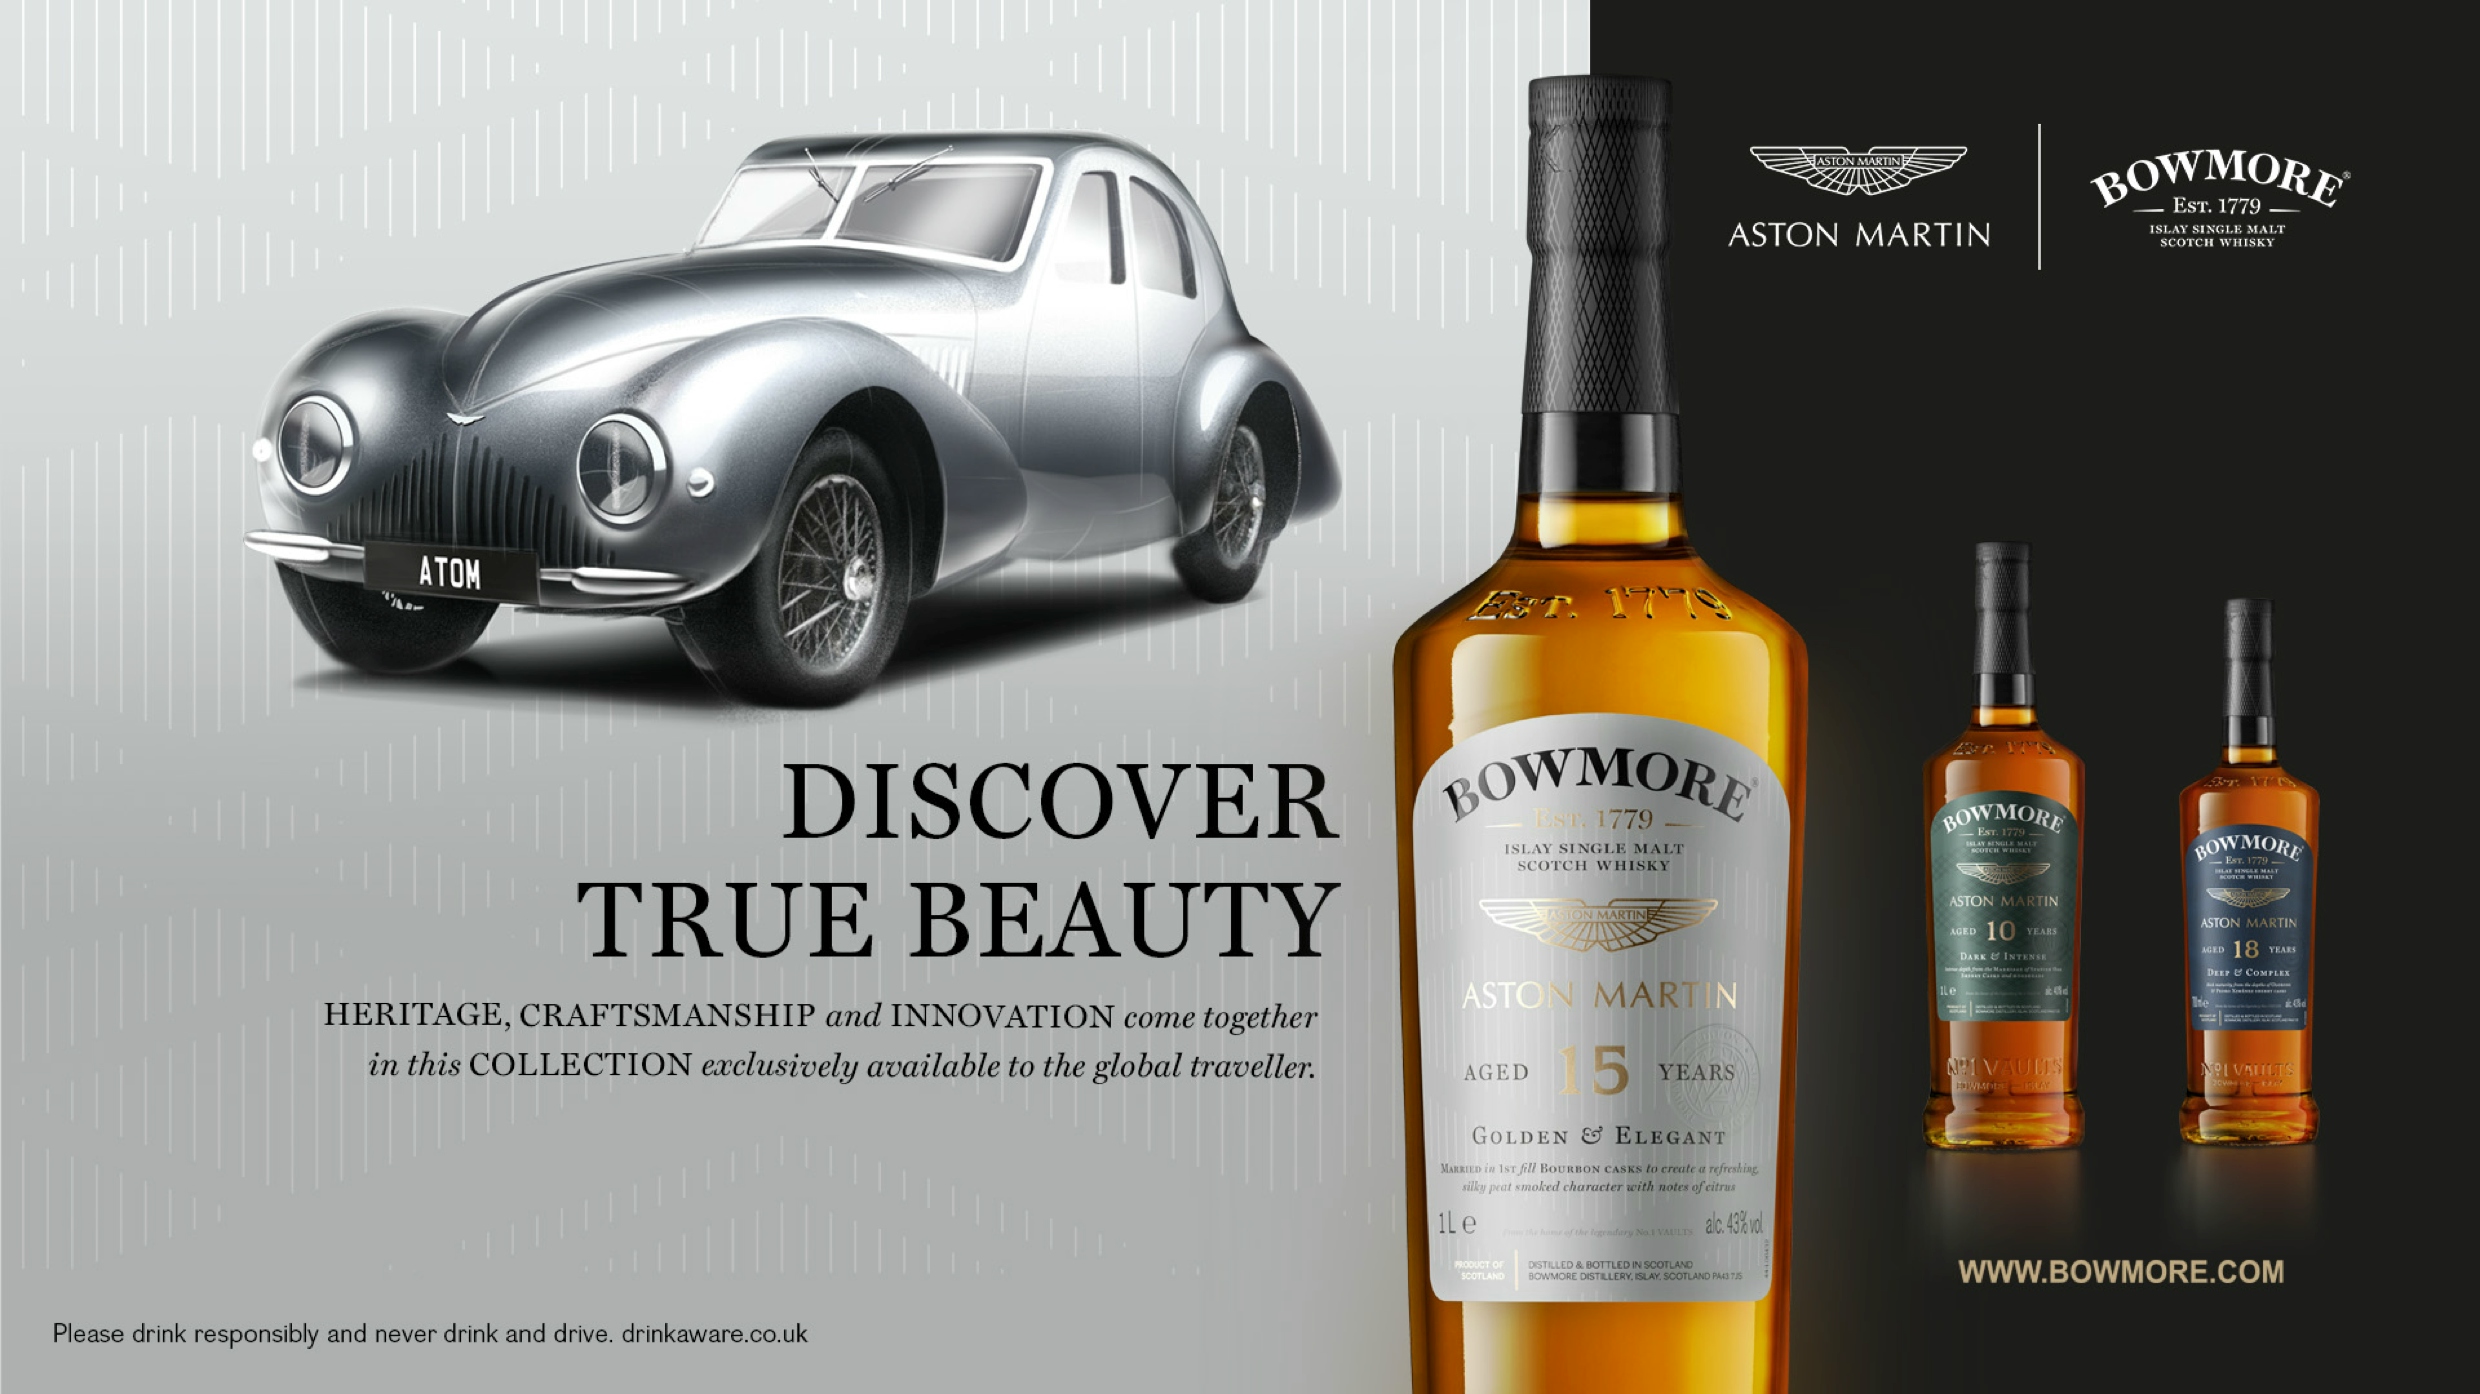 Two Bowmore Aston Martin whisky bottles and a classic Aston Martin Atom car showcase the Bowmore Aston Martin 15 year old whisky bottle in this print image created by More Yum. "DISCOVER TRUE BEAUTY: Heritage craftsmanship and innovation come together in this collection exclusively available to the global traveler". You can discover more at www.bowmore.com